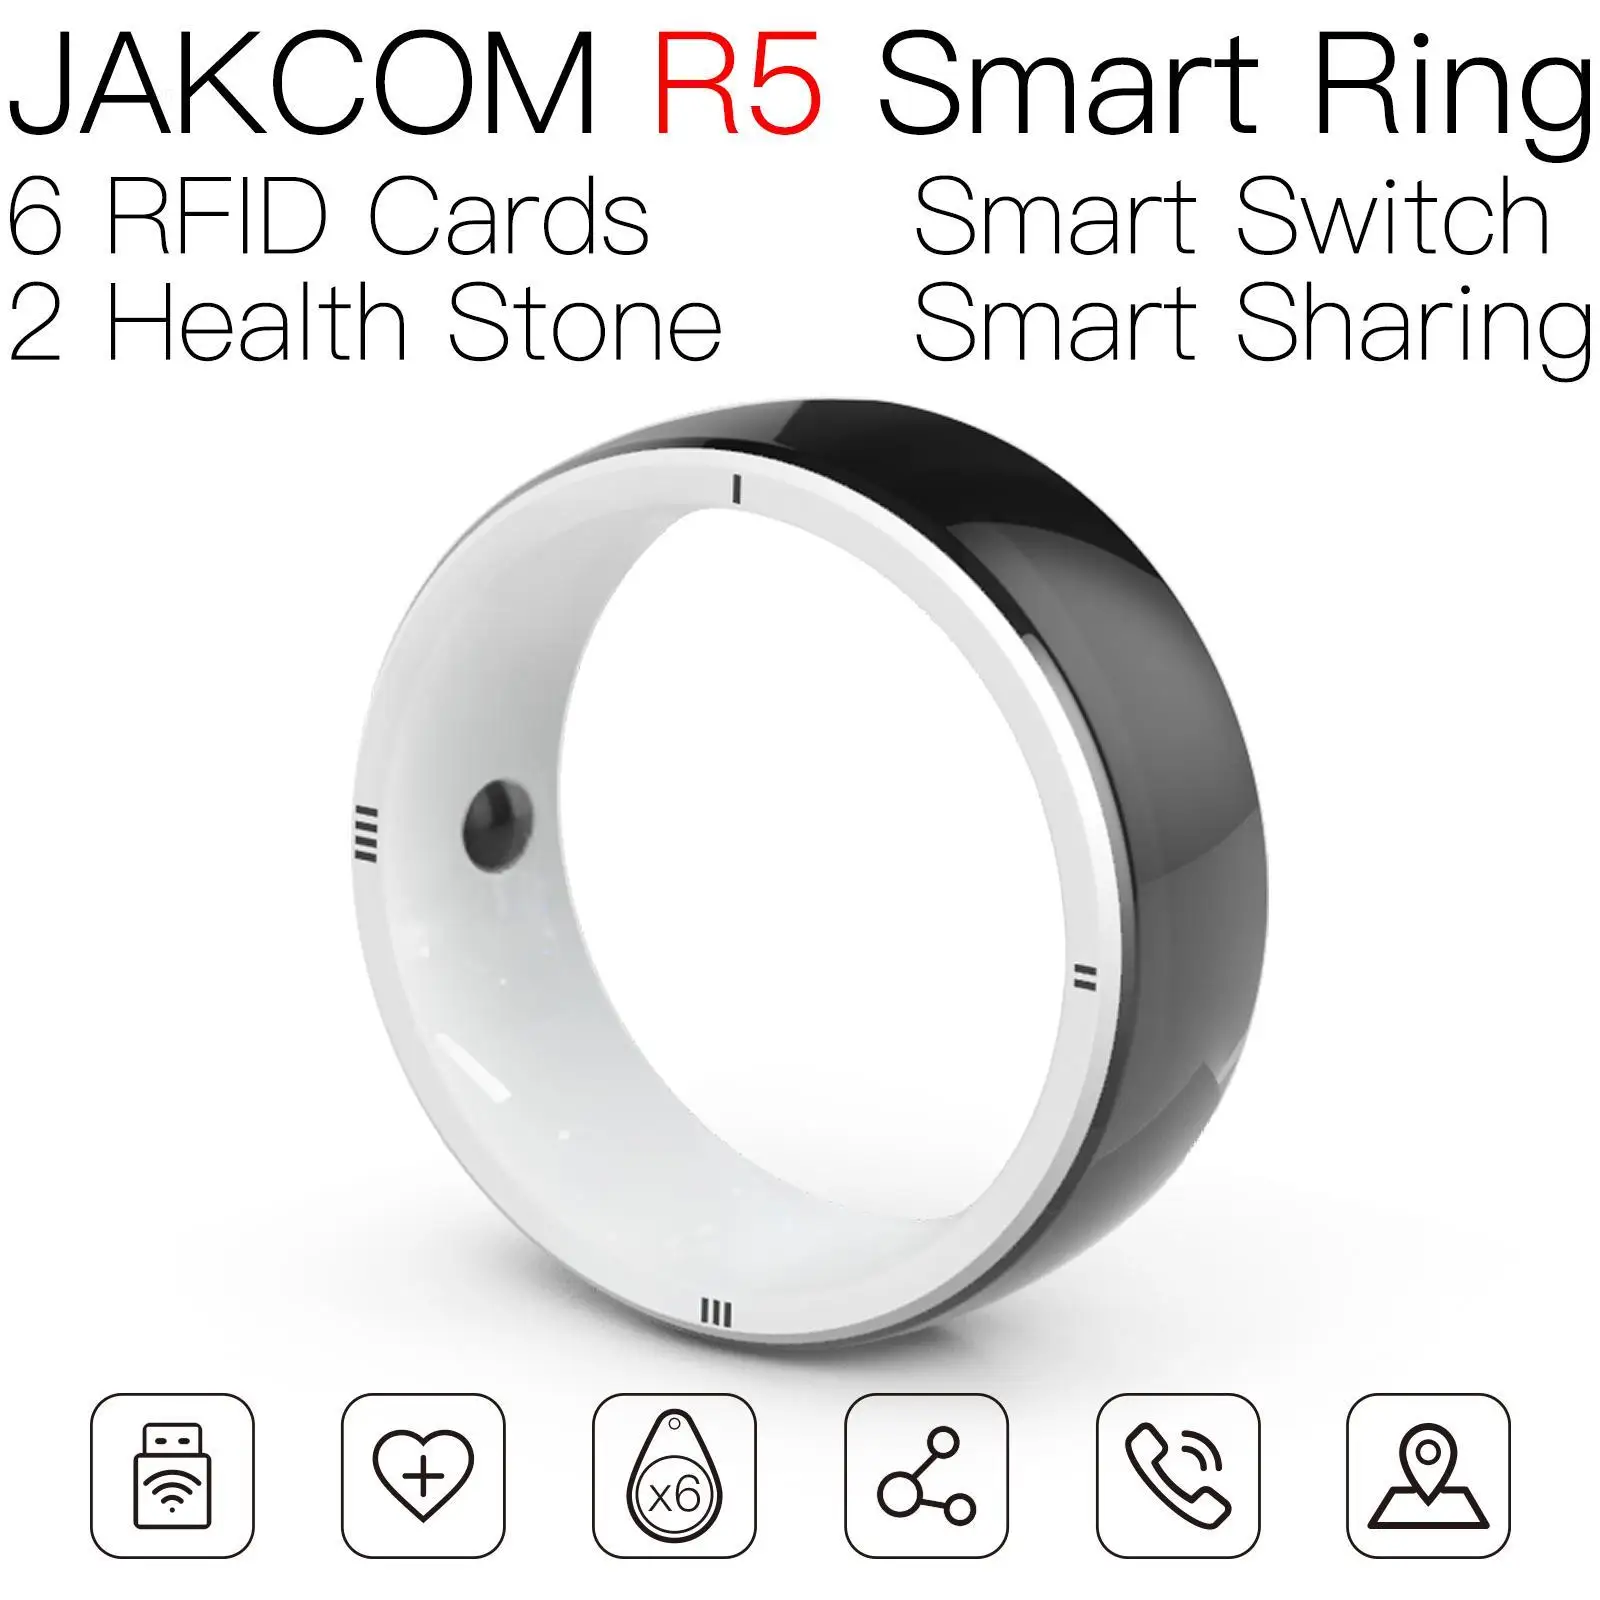 

JAKCOM R5 Smart Ring Best gift with patrol card nfc bank payment crossing new horizons amiido rfid 125khz sticker